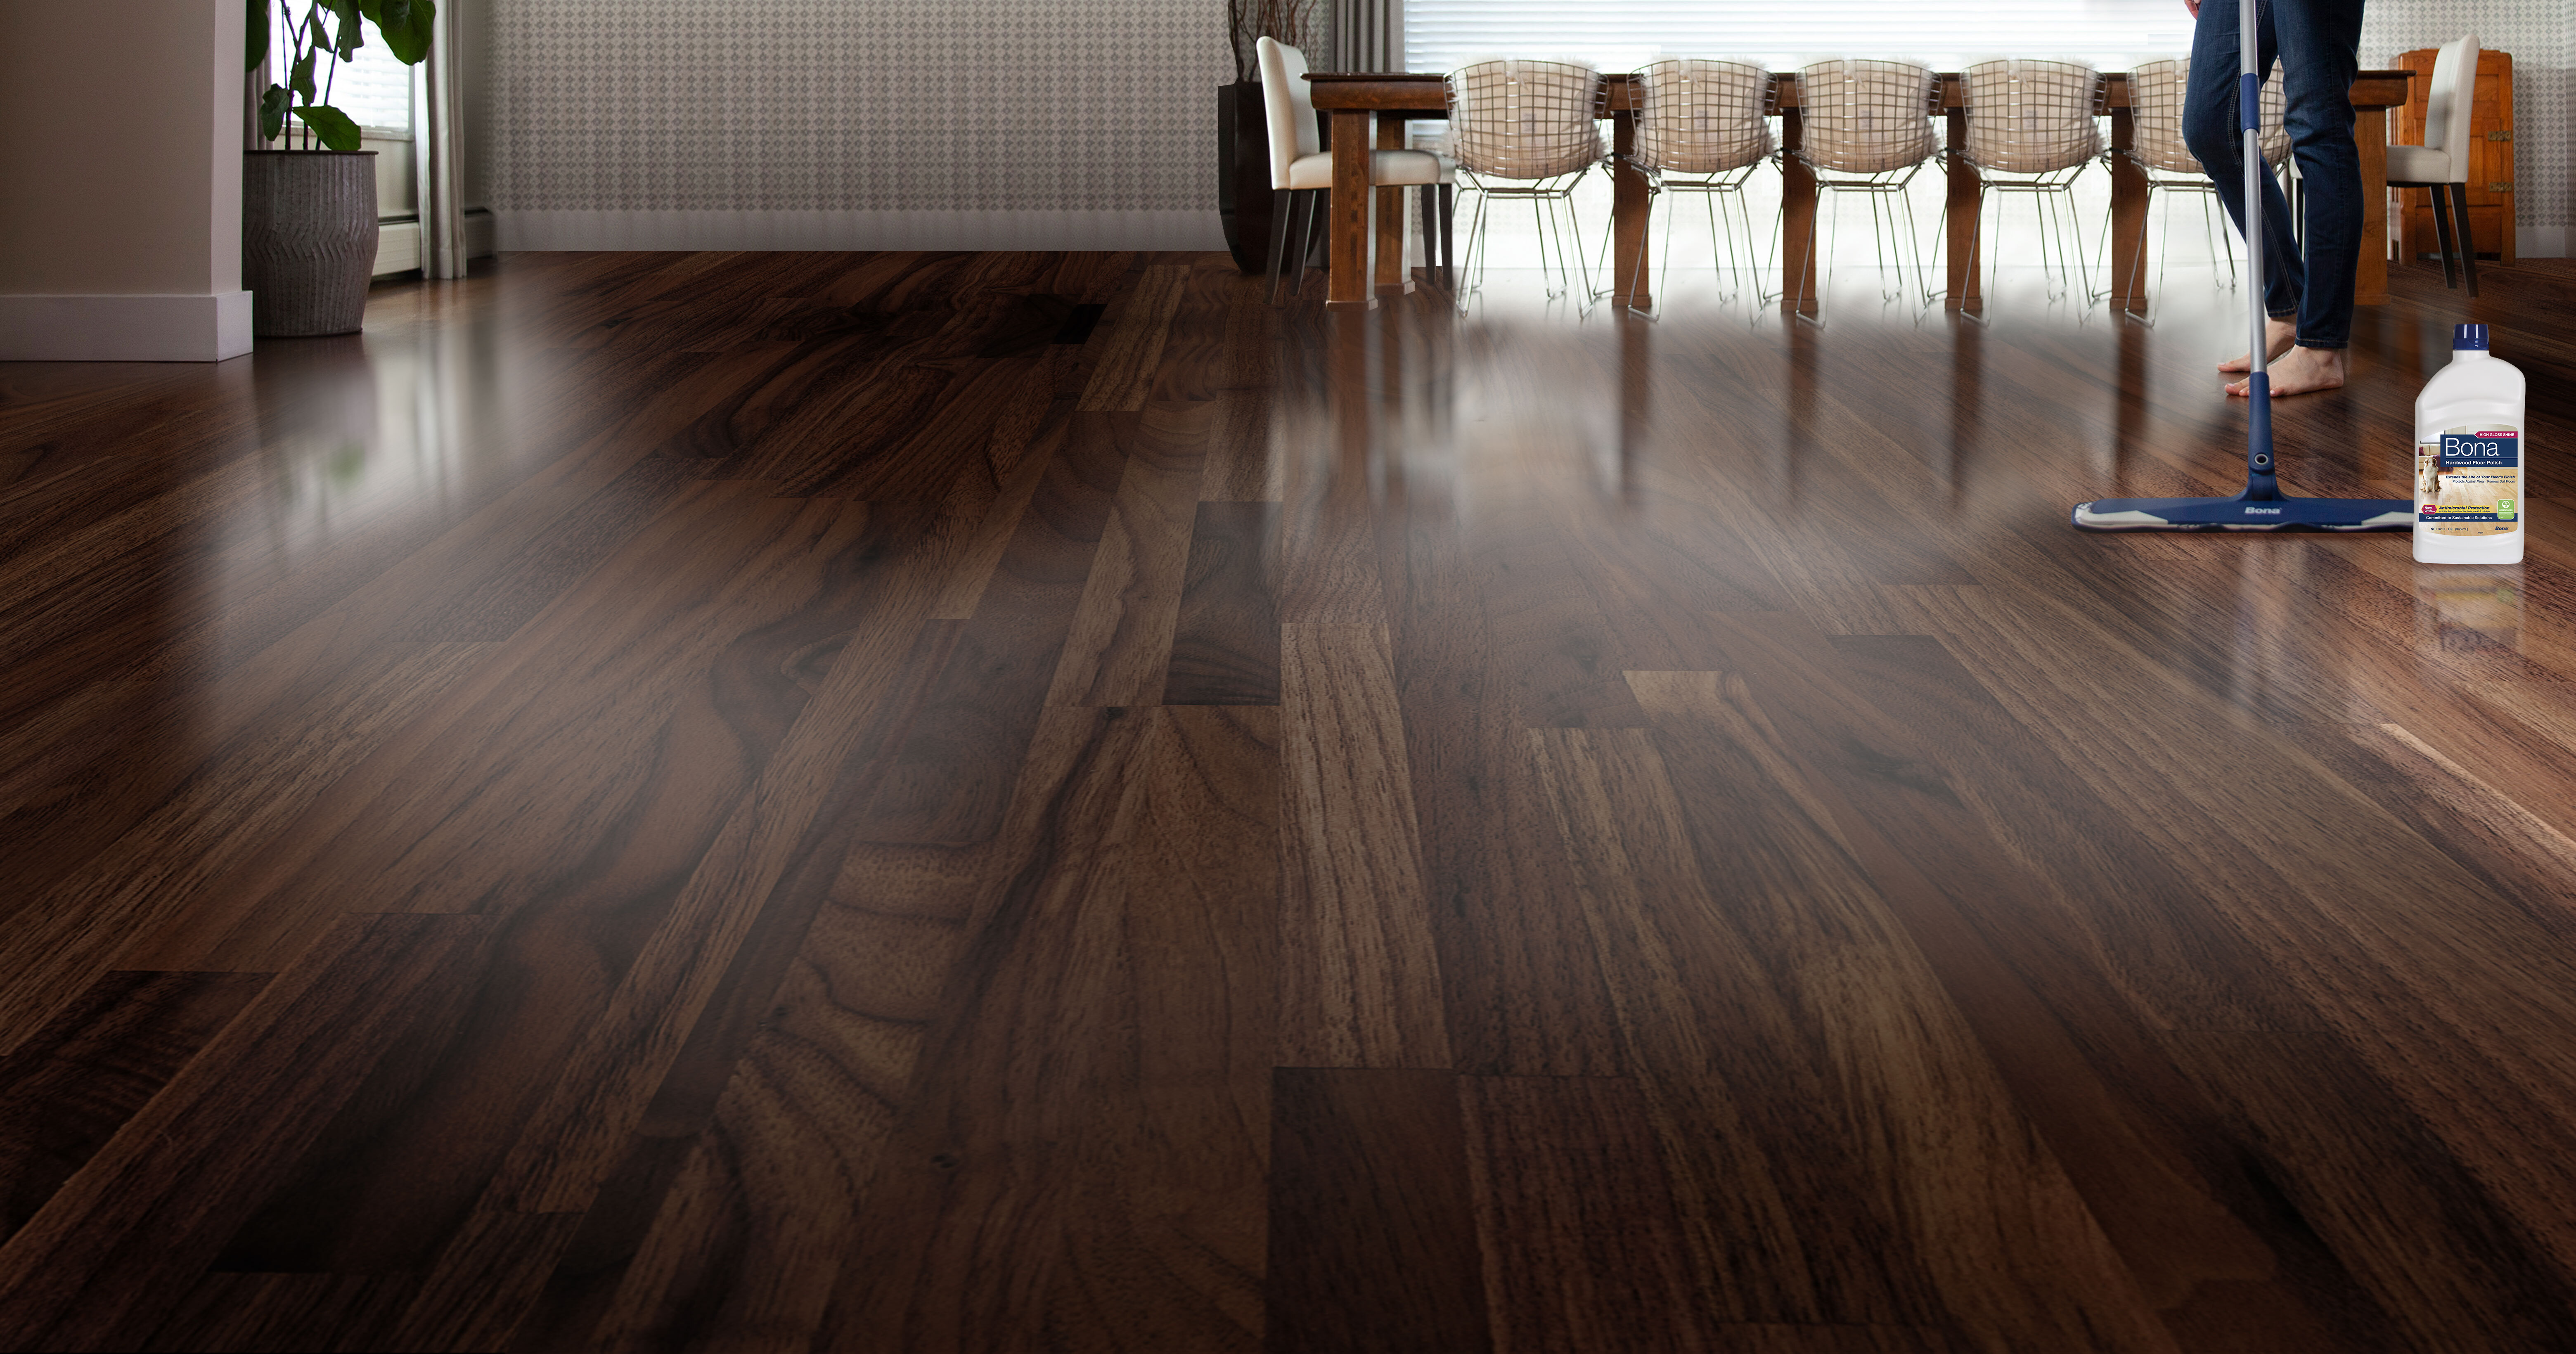 How To Polish Hardwood Floors Do S And, How To Clean And Polish Hardwood Floors